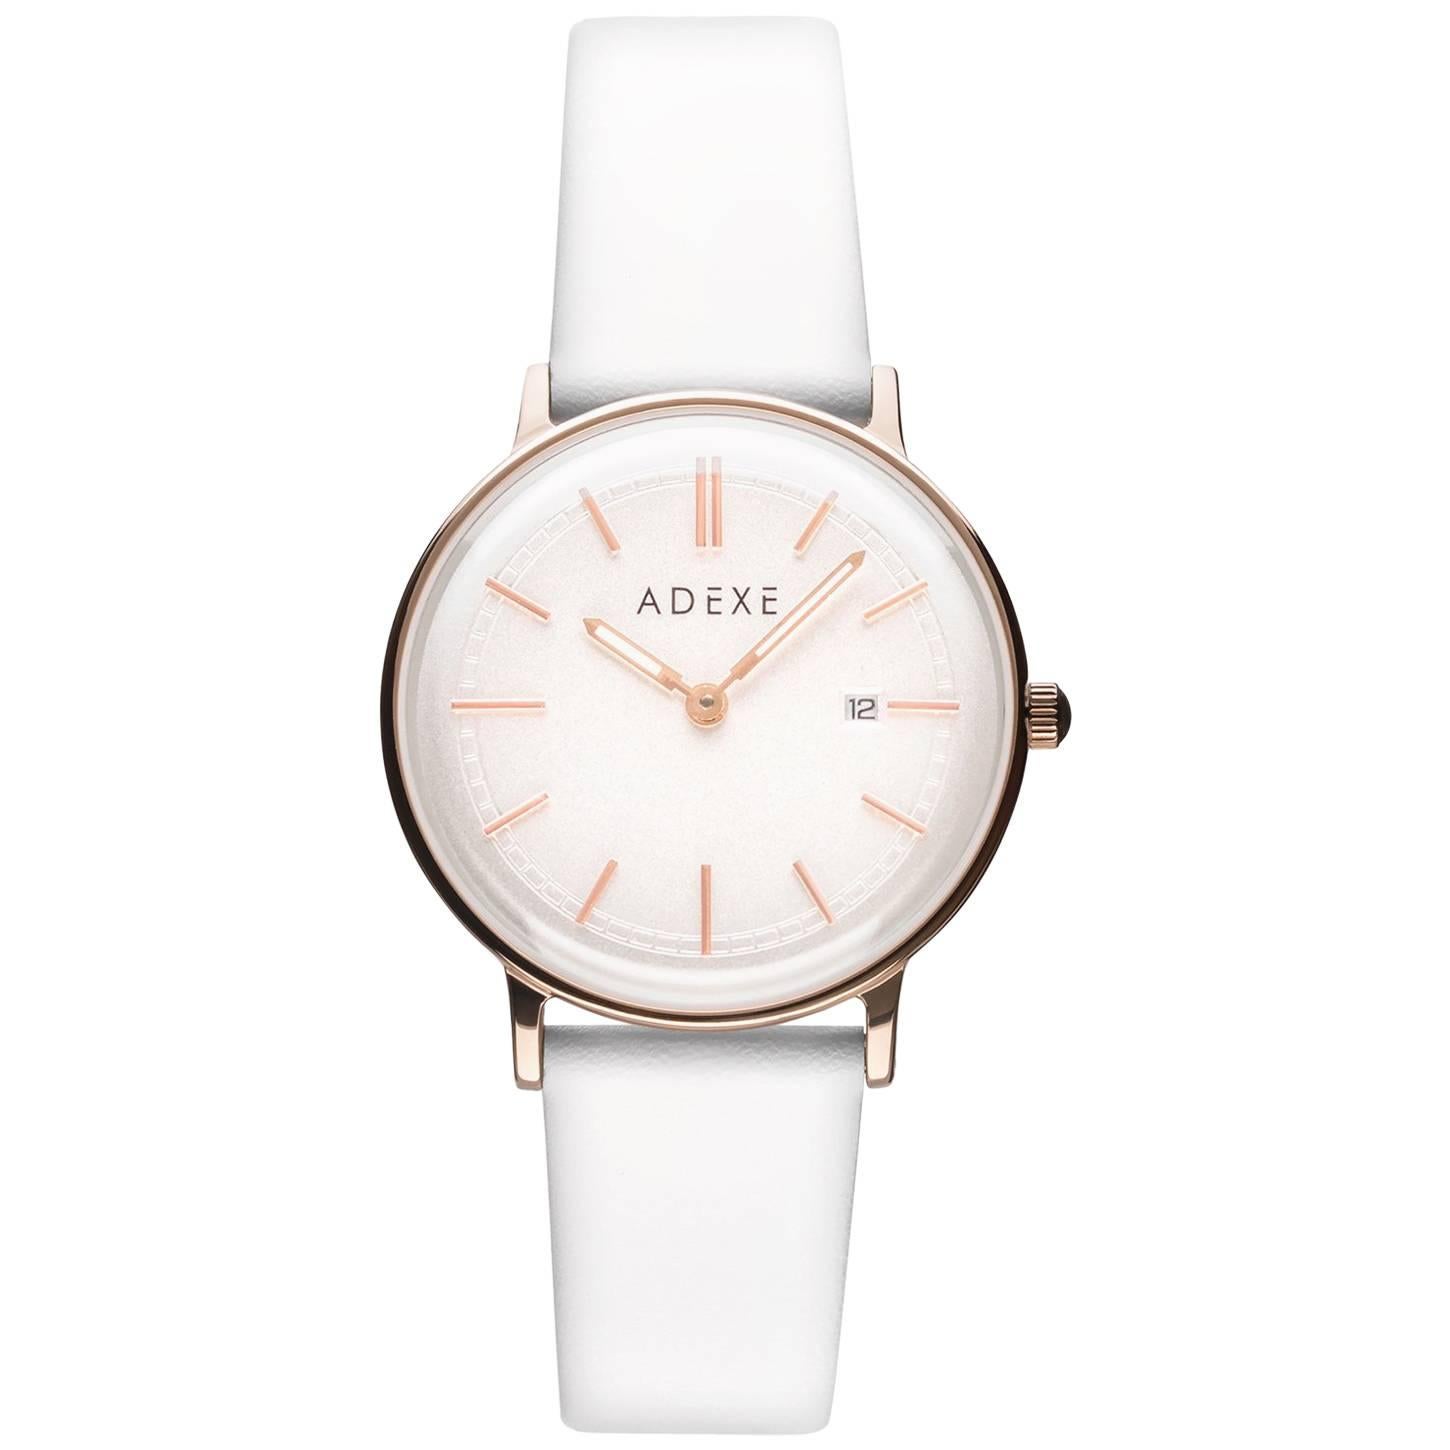 Adexe White and Rose Gold Stainless Steel Genuine Italian Leather Quartz Watch For Sale